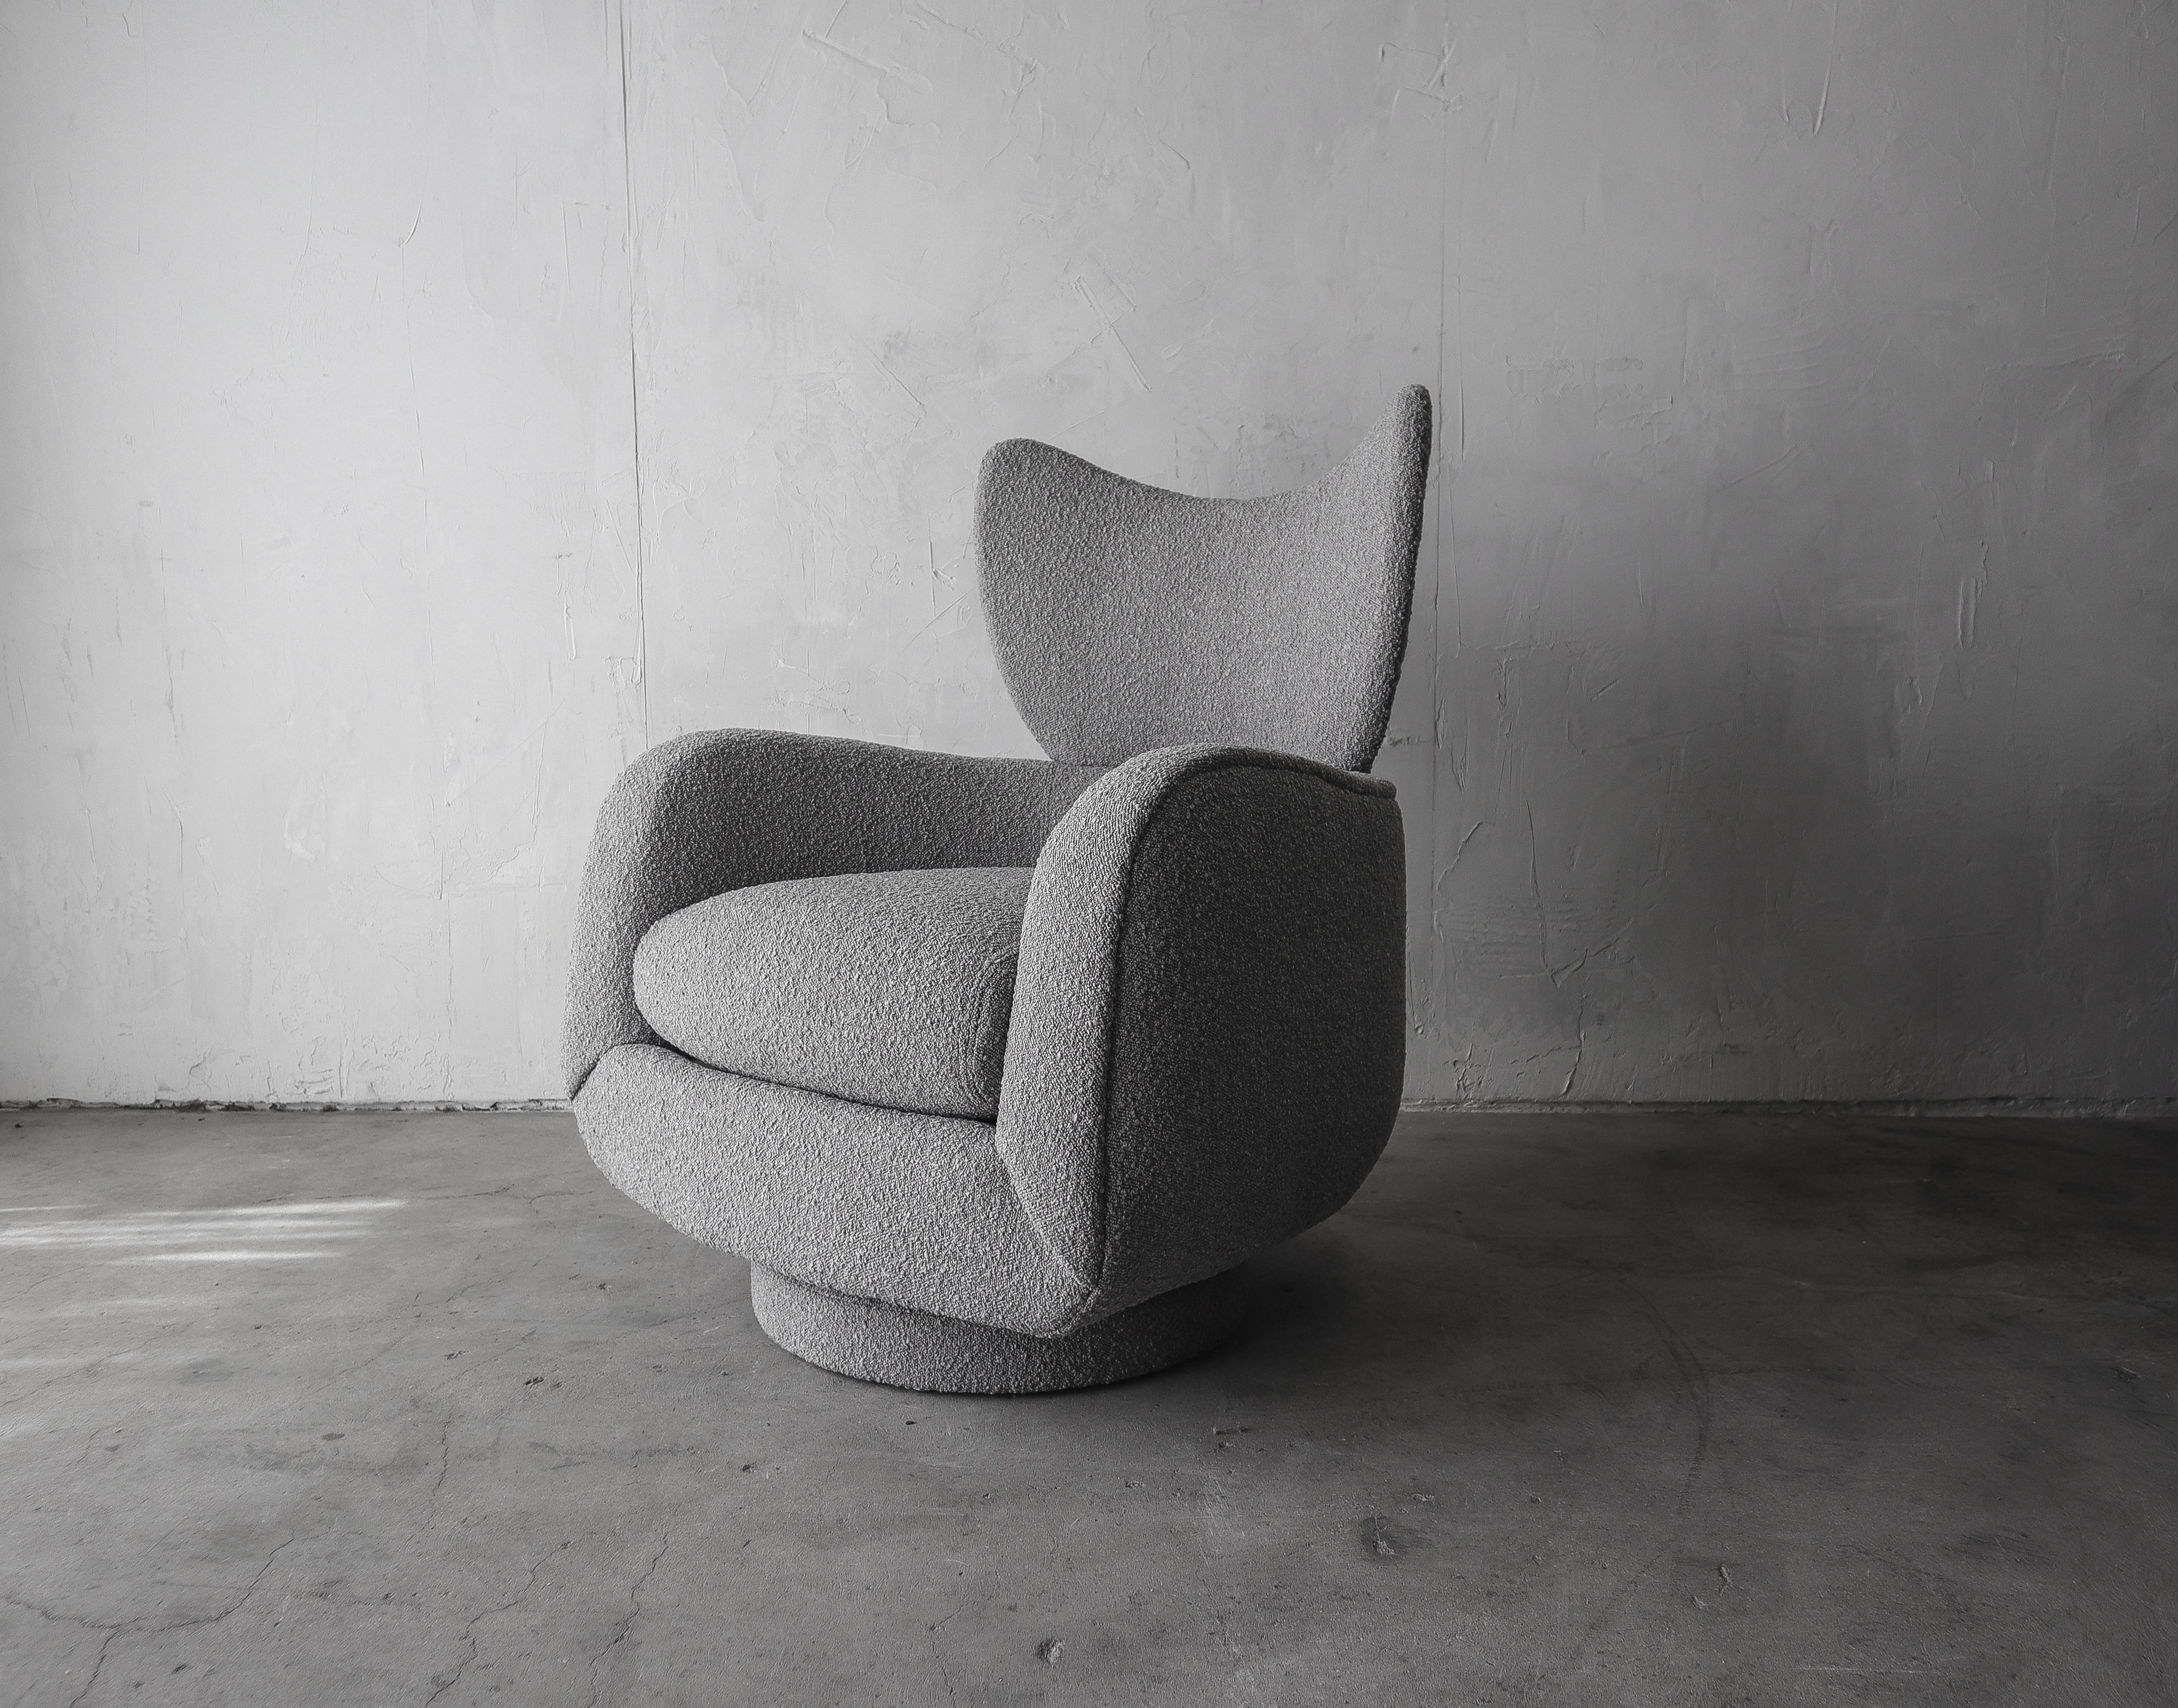 Iconic Vladimir Kagan for Directional wingback tilt and swivel lounge chair with matching ottoman. Both the chair and ottoman are newly reupholstered in gray bouclé fabric. The chair is comfortable yet sculptural, its furniture and also art. The